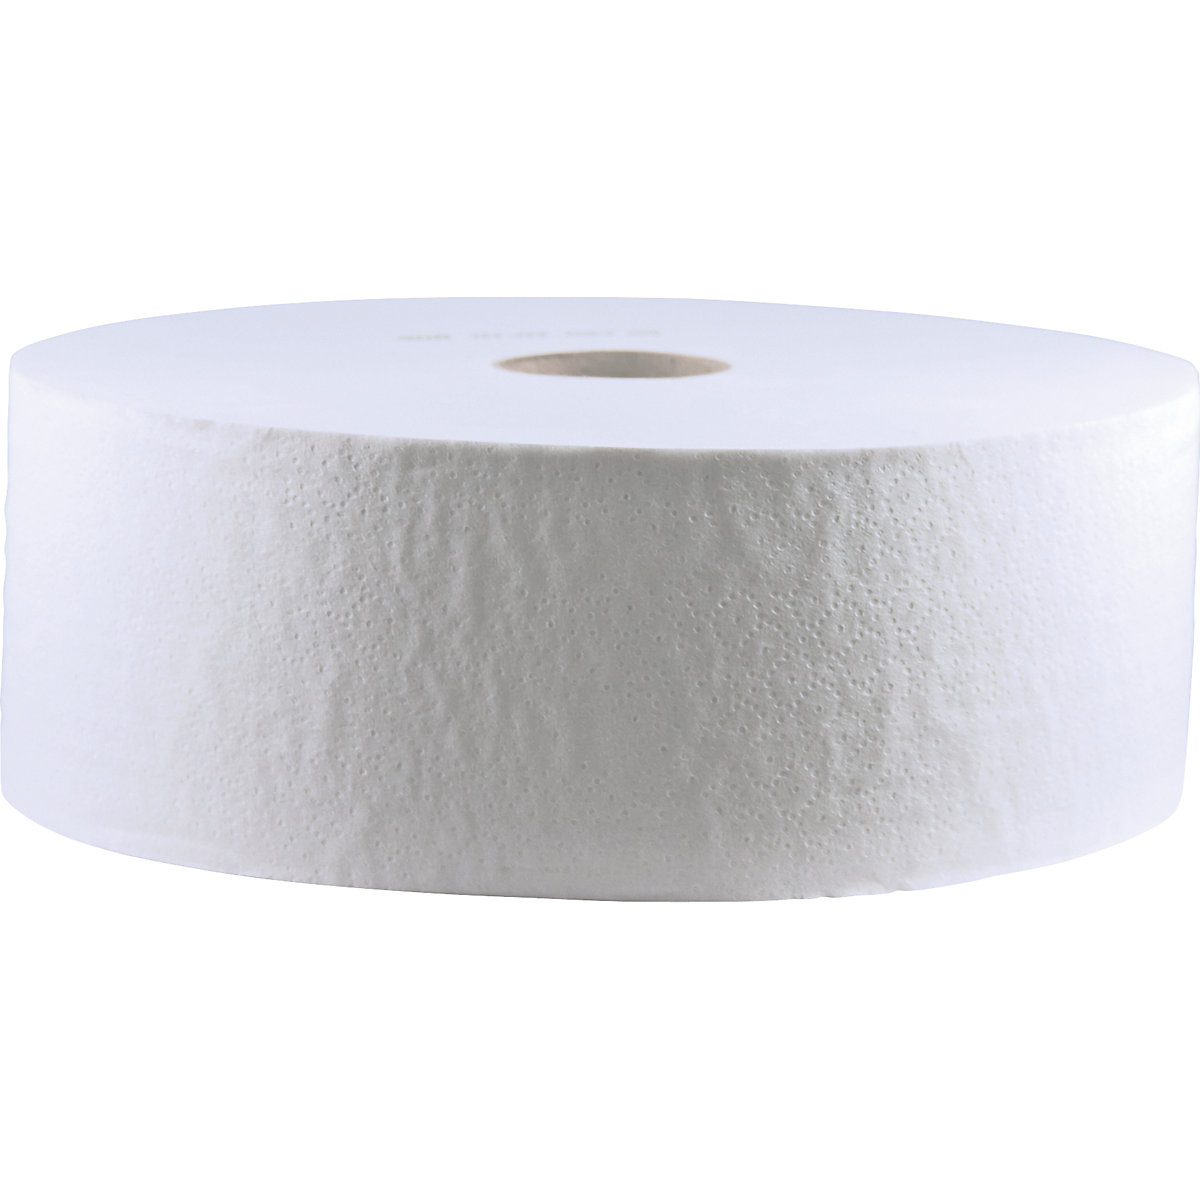 Large rolls of toilet tissue - CWS